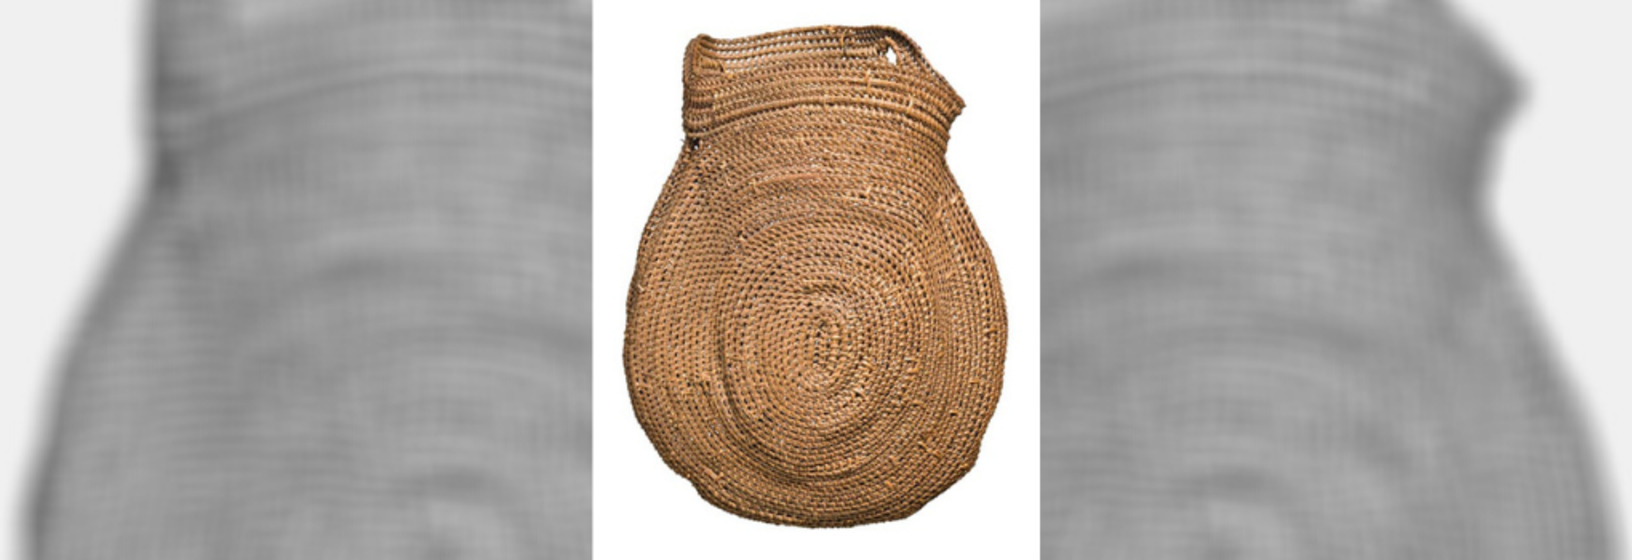 large woven basket in natural fibre with traditional circular motif